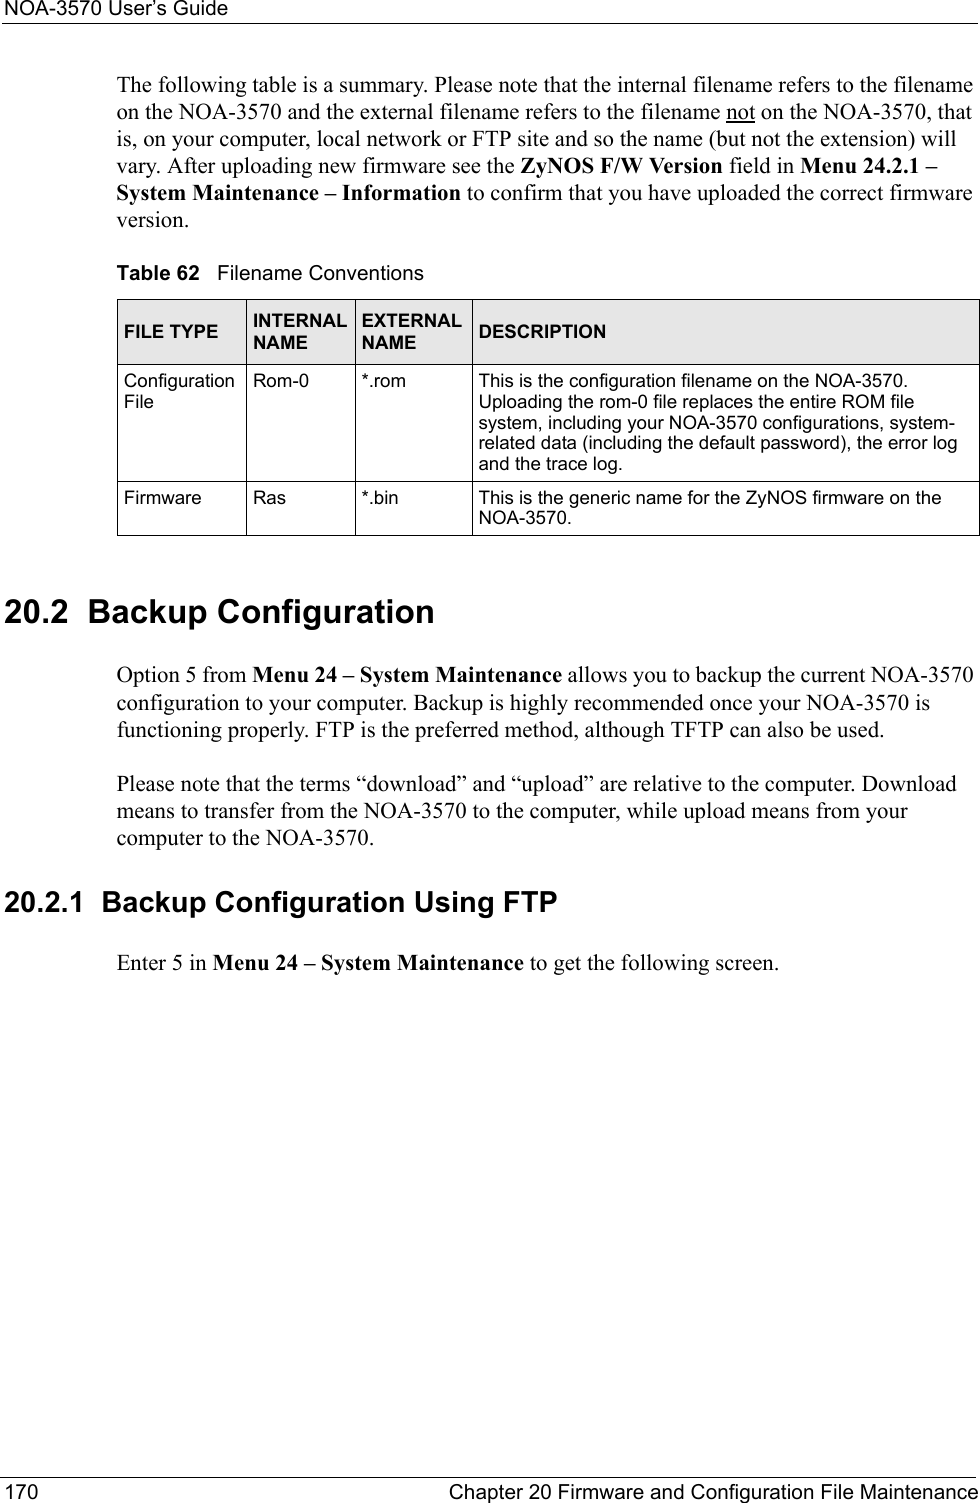 NOA-3570 User’s Guide170 Chapter 20 Firmware and Configuration File MaintenanceThe following table is a summary. Please note that the internal filename refers to the filename on the NOA-3570 and the external filename refers to the filename not on the NOA-3570, that is, on your computer, local network or FTP site and so the name (but not the extension) will vary. After uploading new firmware see the ZyNOS F/W Version field in Menu 24.2.1 – System Maintenance – Information to confirm that you have uploaded the correct firmware version.20.2  Backup Configuration Option 5 from Menu 24 – System Maintenance allows you to backup the current NOA-3570 configuration to your computer. Backup is highly recommended once your NOA-3570 is functioning properly. FTP is the preferred method, although TFTP can also be used. Please note that the terms “download” and “upload” are relative to the computer. Download means to transfer from the NOA-3570 to the computer, while upload means from your computer to the NOA-3570.20.2.1  Backup Configuration Using FTPEnter 5 in Menu 24 – System Maintenance to get the following screen.Table 62   Filename ConventionsFILE TYPE INTERNAL NAMEEXTERNAL NAME DESCRIPTIONConfiguration FileRom-0 *.rom This is the configuration filename on the NOA-3570. Uploading the rom-0 file replaces the entire ROM file system, including your NOA-3570 configurations, system-related data (including the default password), the error log and the trace log.Firmware Ras *.bin This is the generic name for the ZyNOS firmware on the NOA-3570.